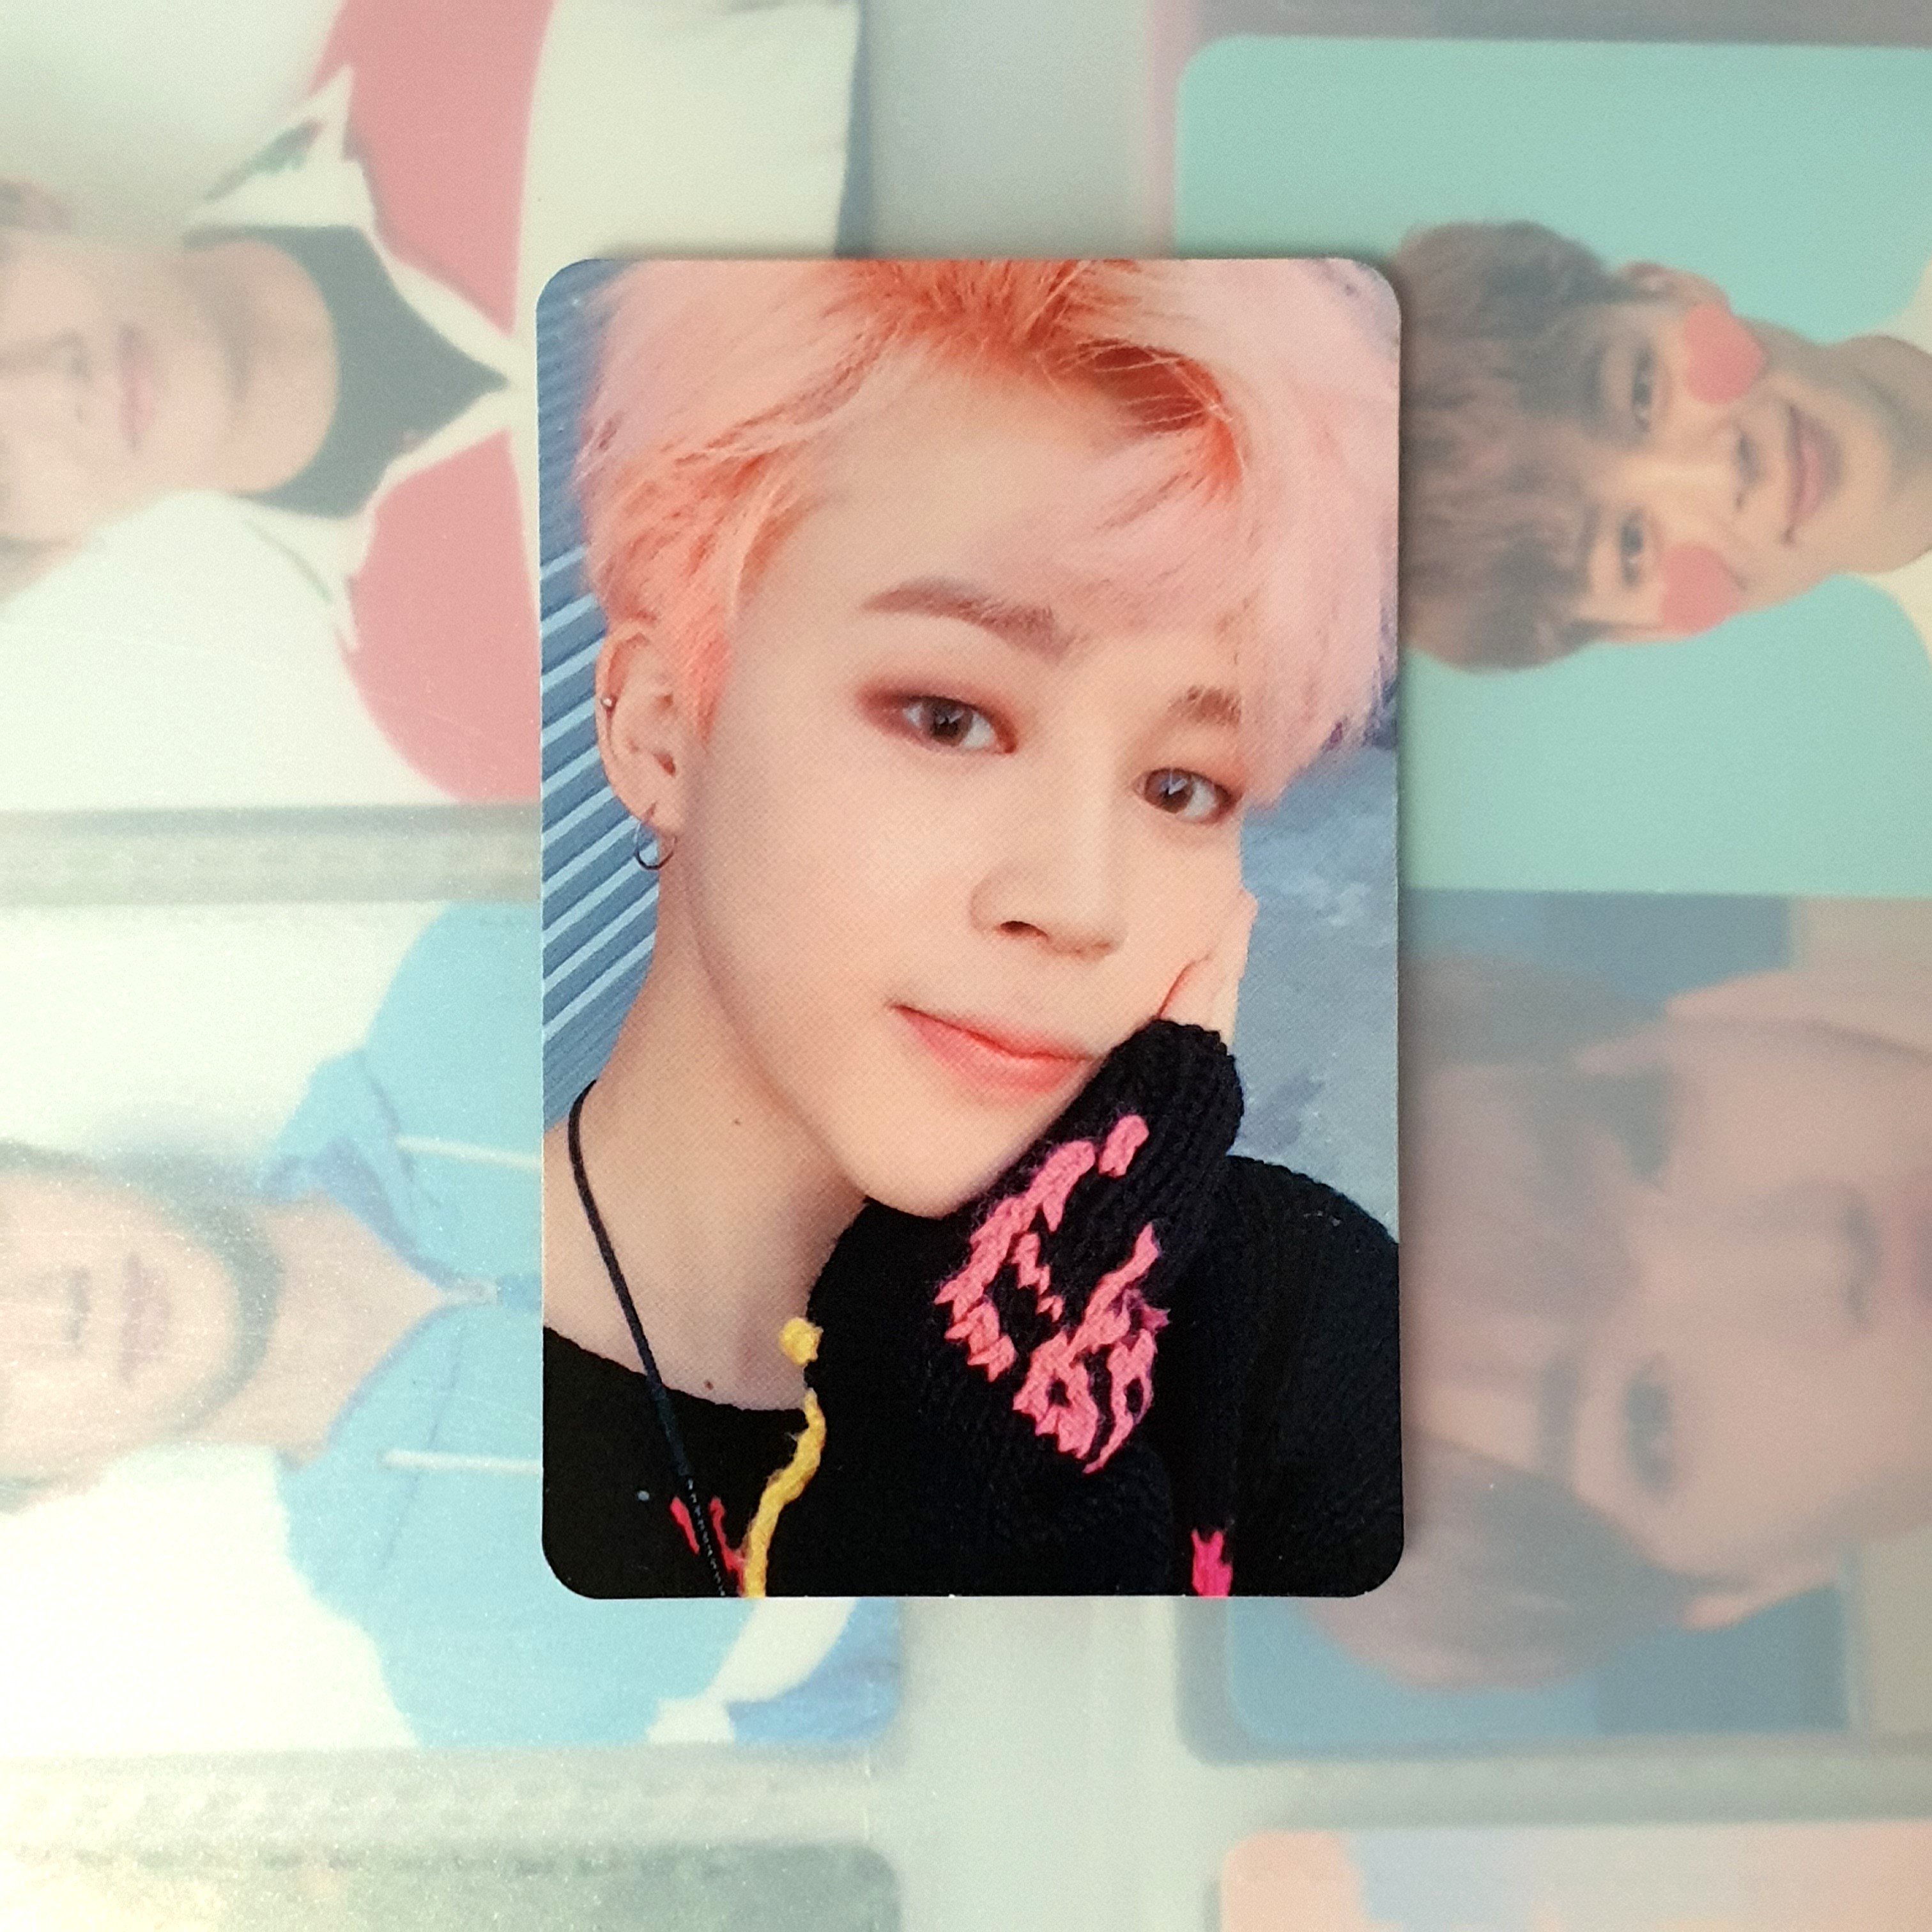 traded an answer jimin pc for jimin ynwa. not sure if it's real or fake?  comparison to my official namjoon, more info in comments!! thank u<3 :  r/kpopcollections